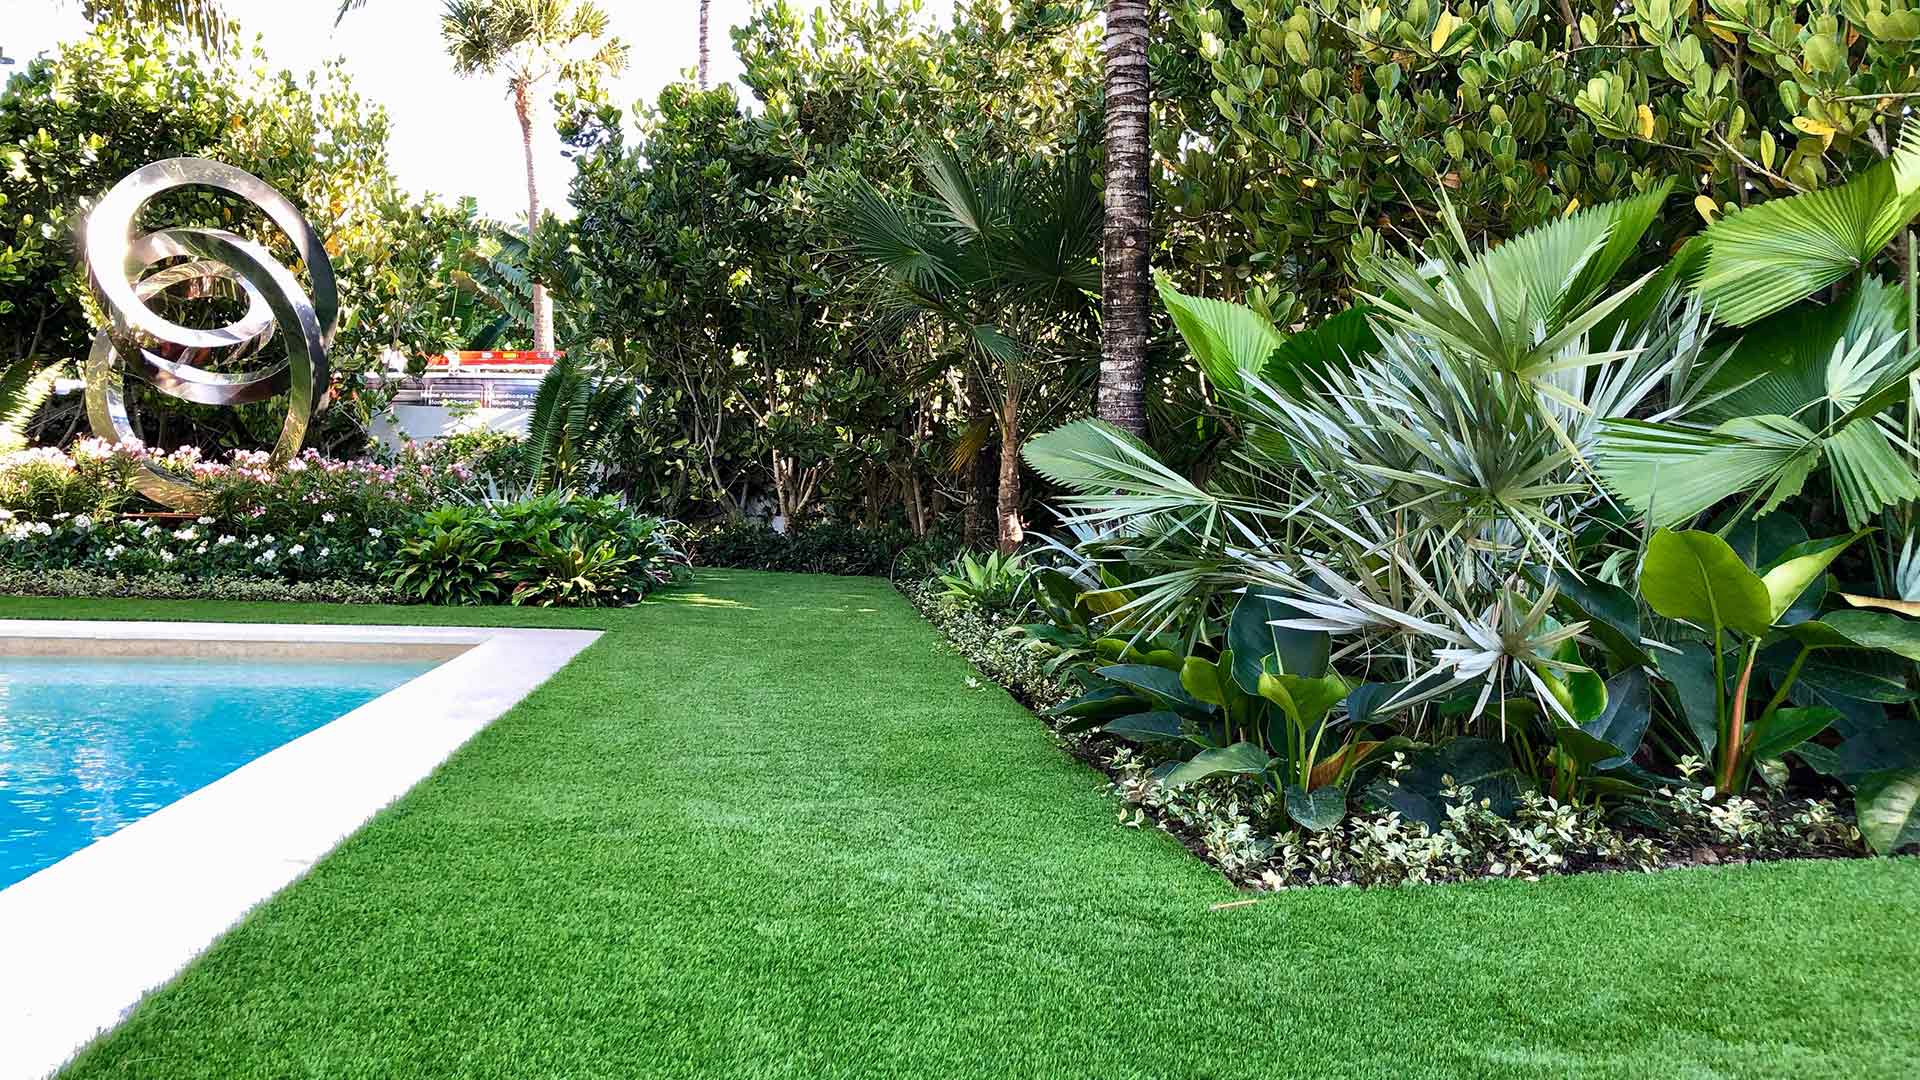 Artificial turf installed for a tropical landscape in Palm Beach, FL.